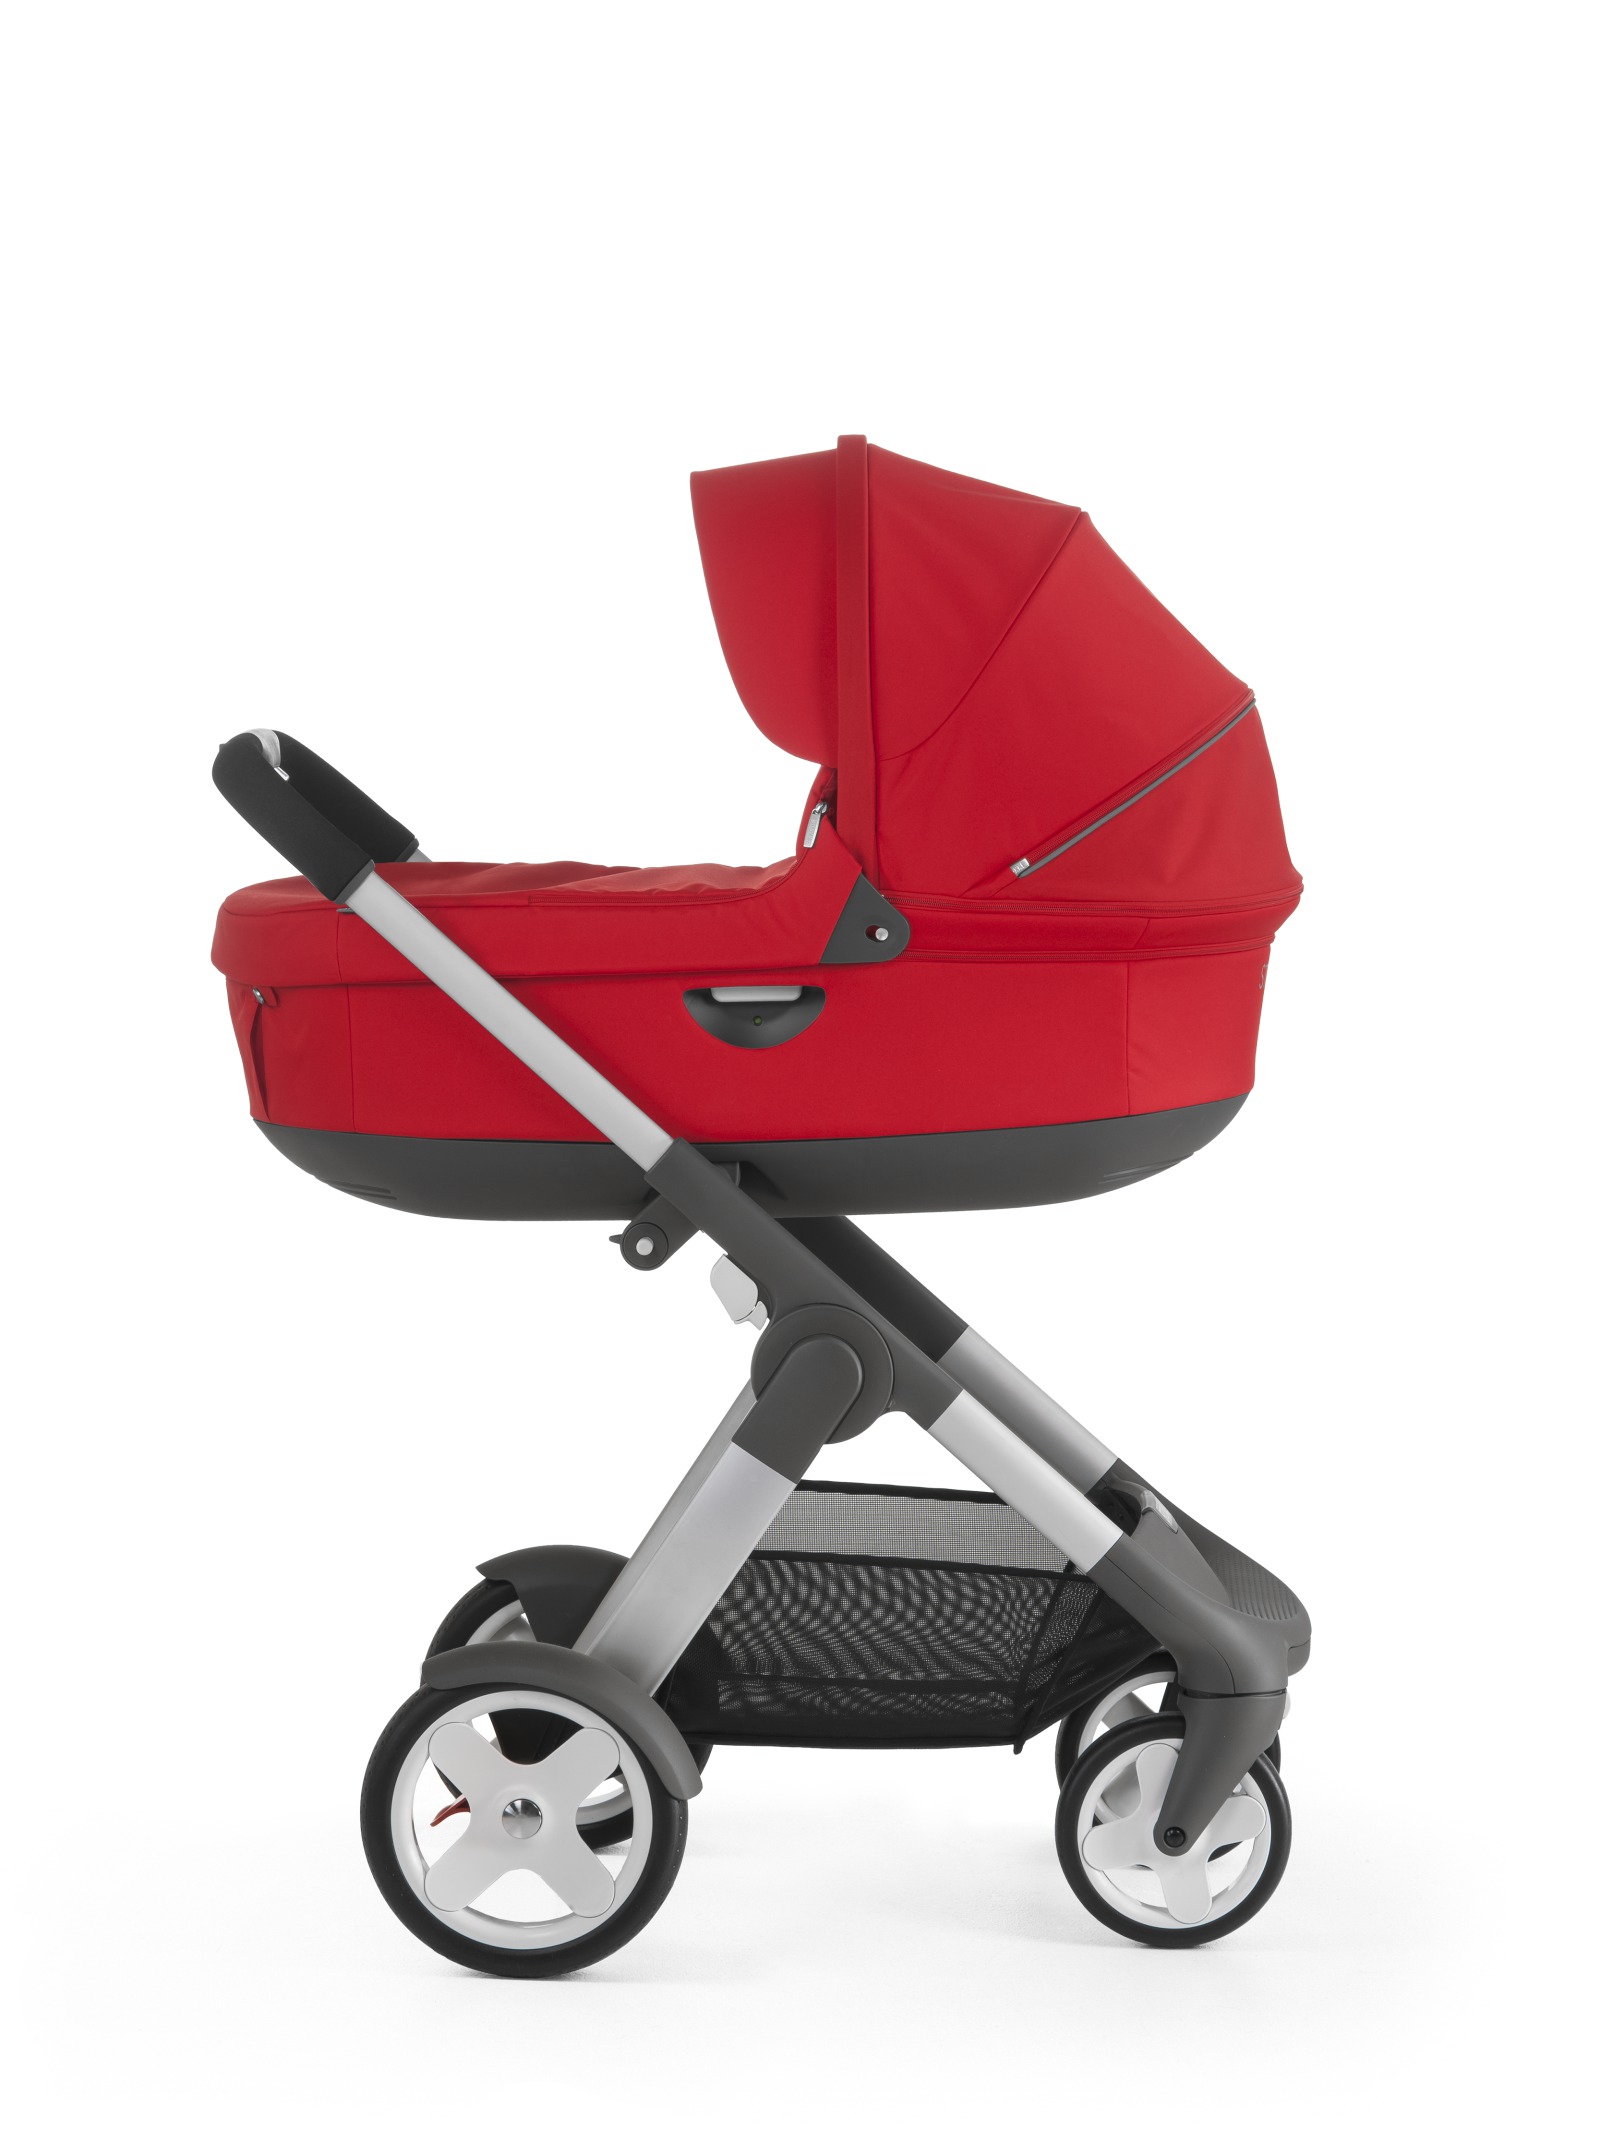 which baby stroller should i buy